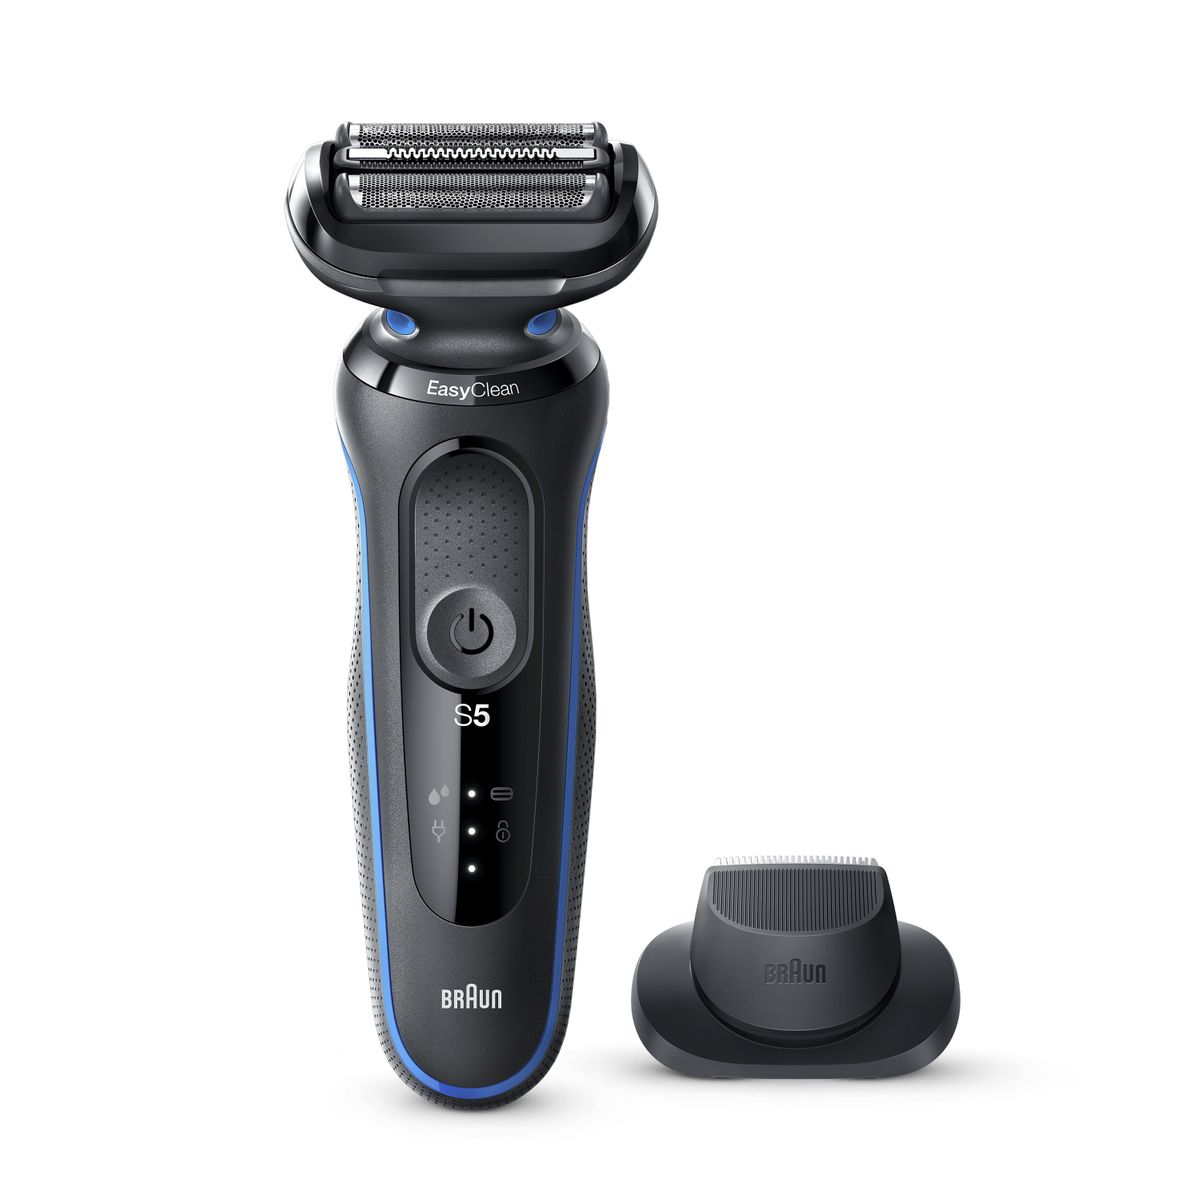 Braun Series 5s shaver men, electric shaver with 3 flexible blades, precision trimmer, 50 min run time, EasyClick attachments, Wet&Dry, B1200s, blue with precision trimmer single